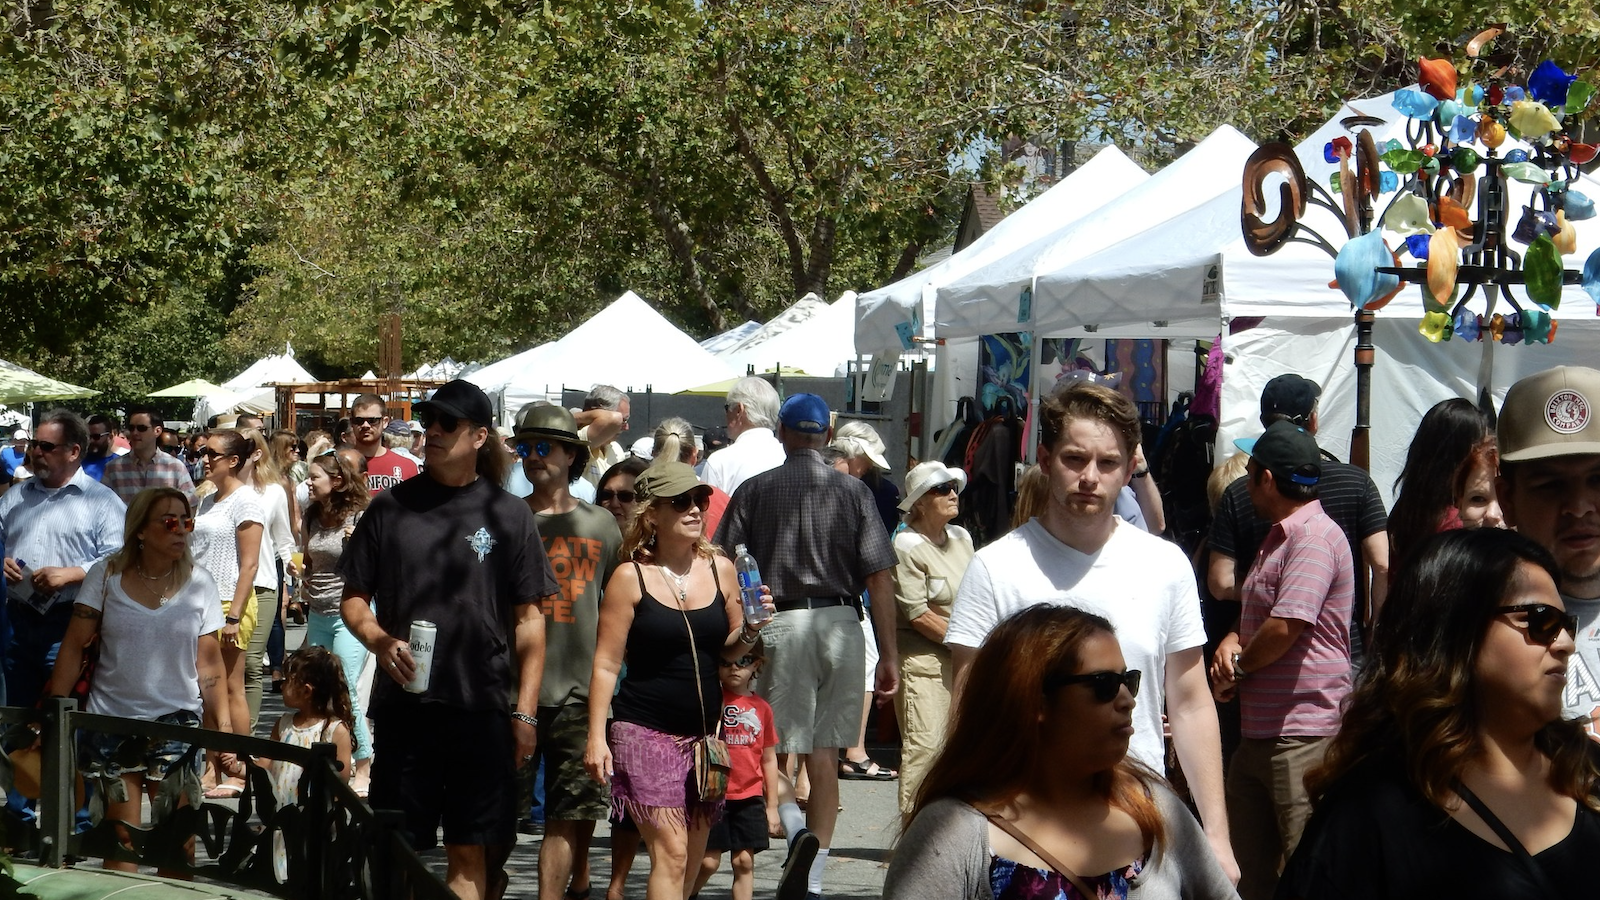 People walk through crowd at Palo Alto Festival of the Arts